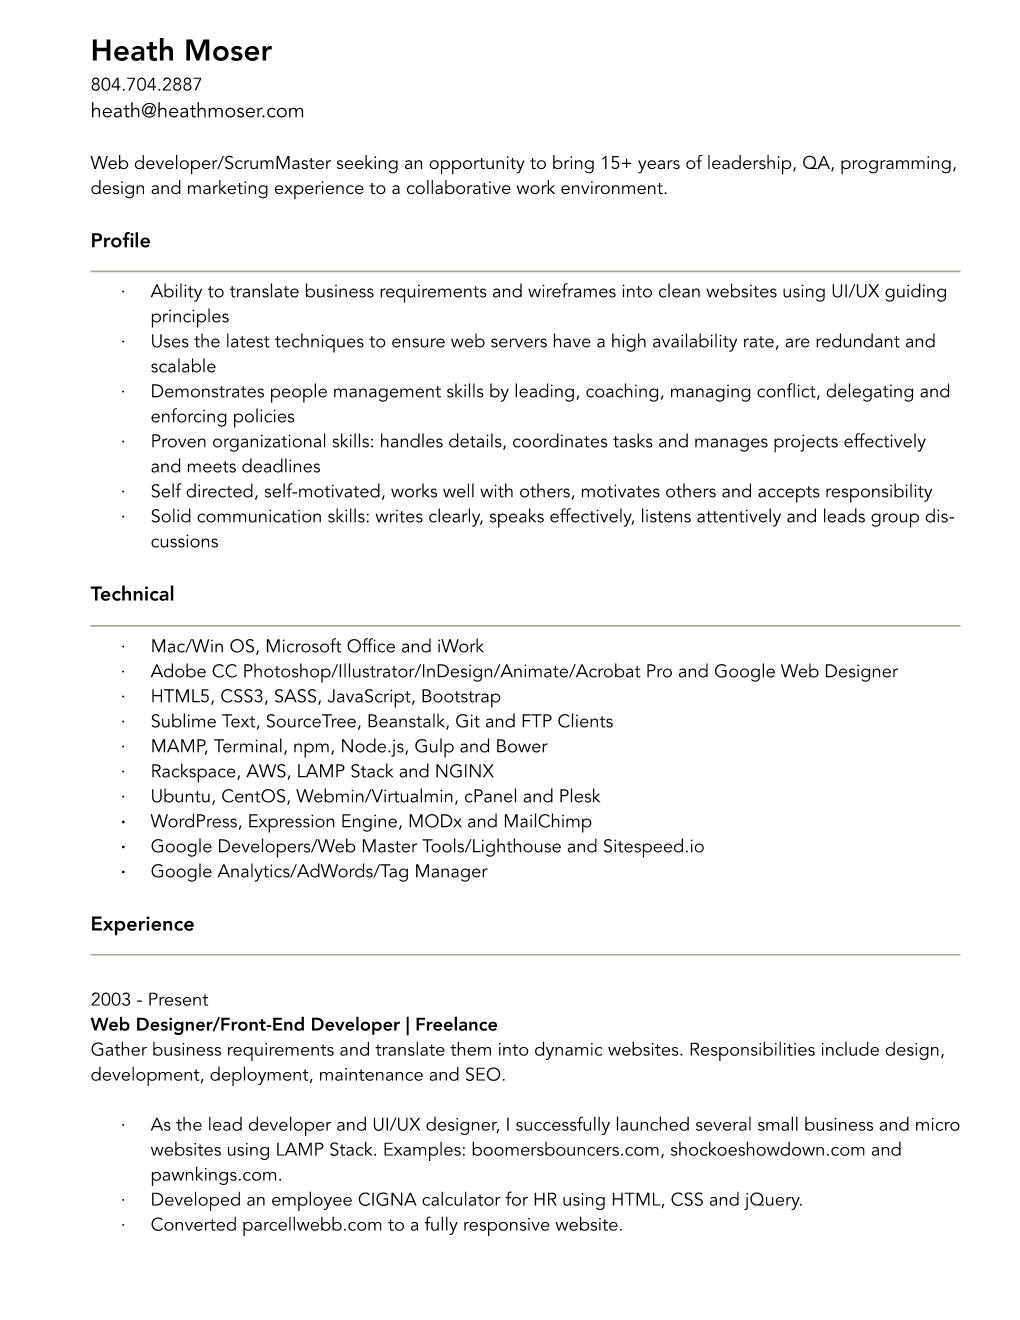 Heath Moser Resume 07162017 2.Pages